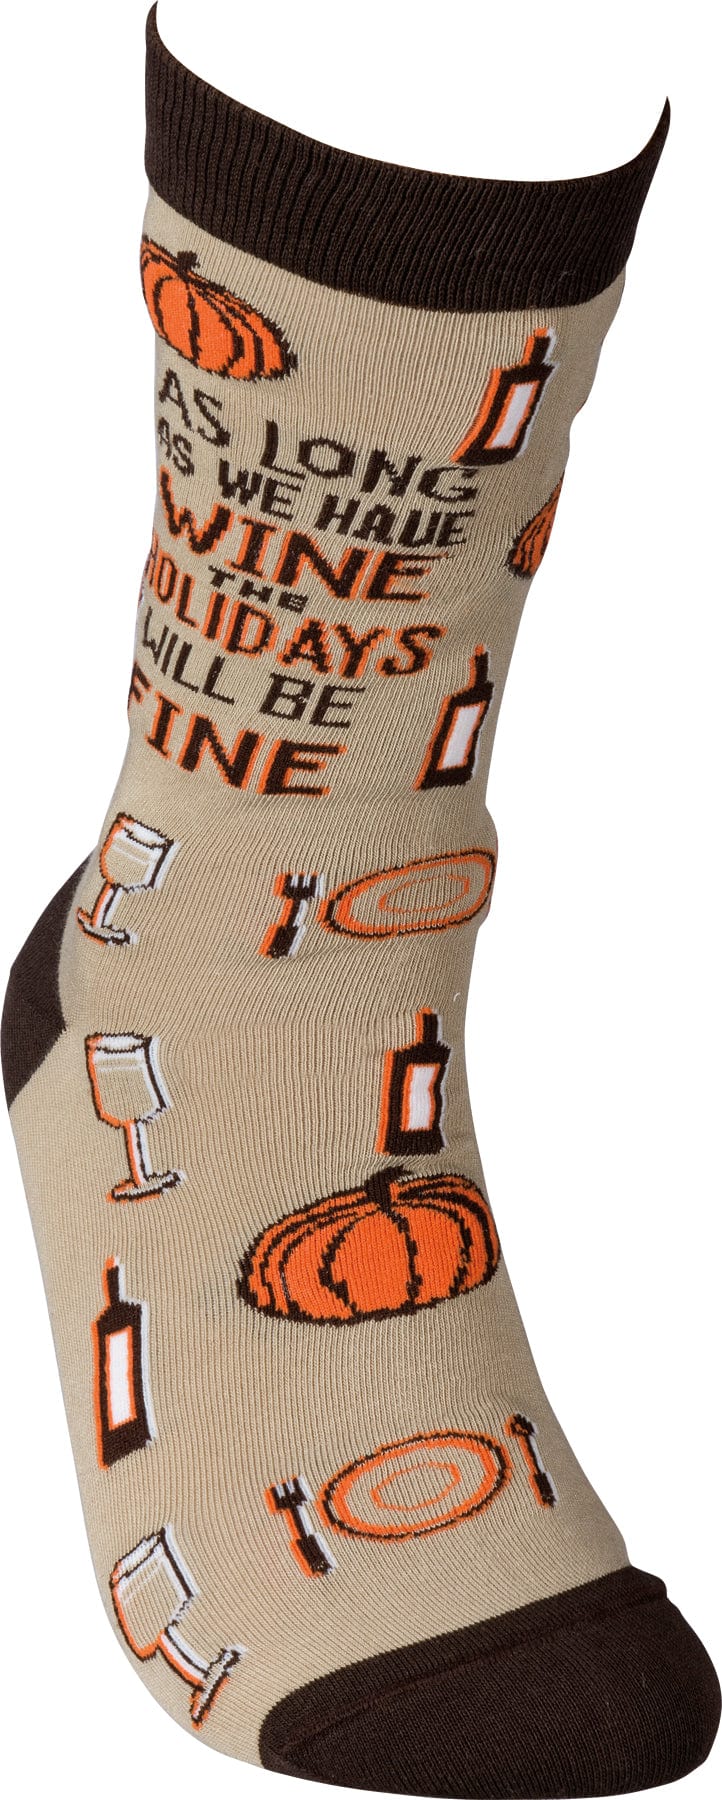 Socks One Size Fits Most Socks - As Long As We Have Wine Holidays Fine PBK-39475